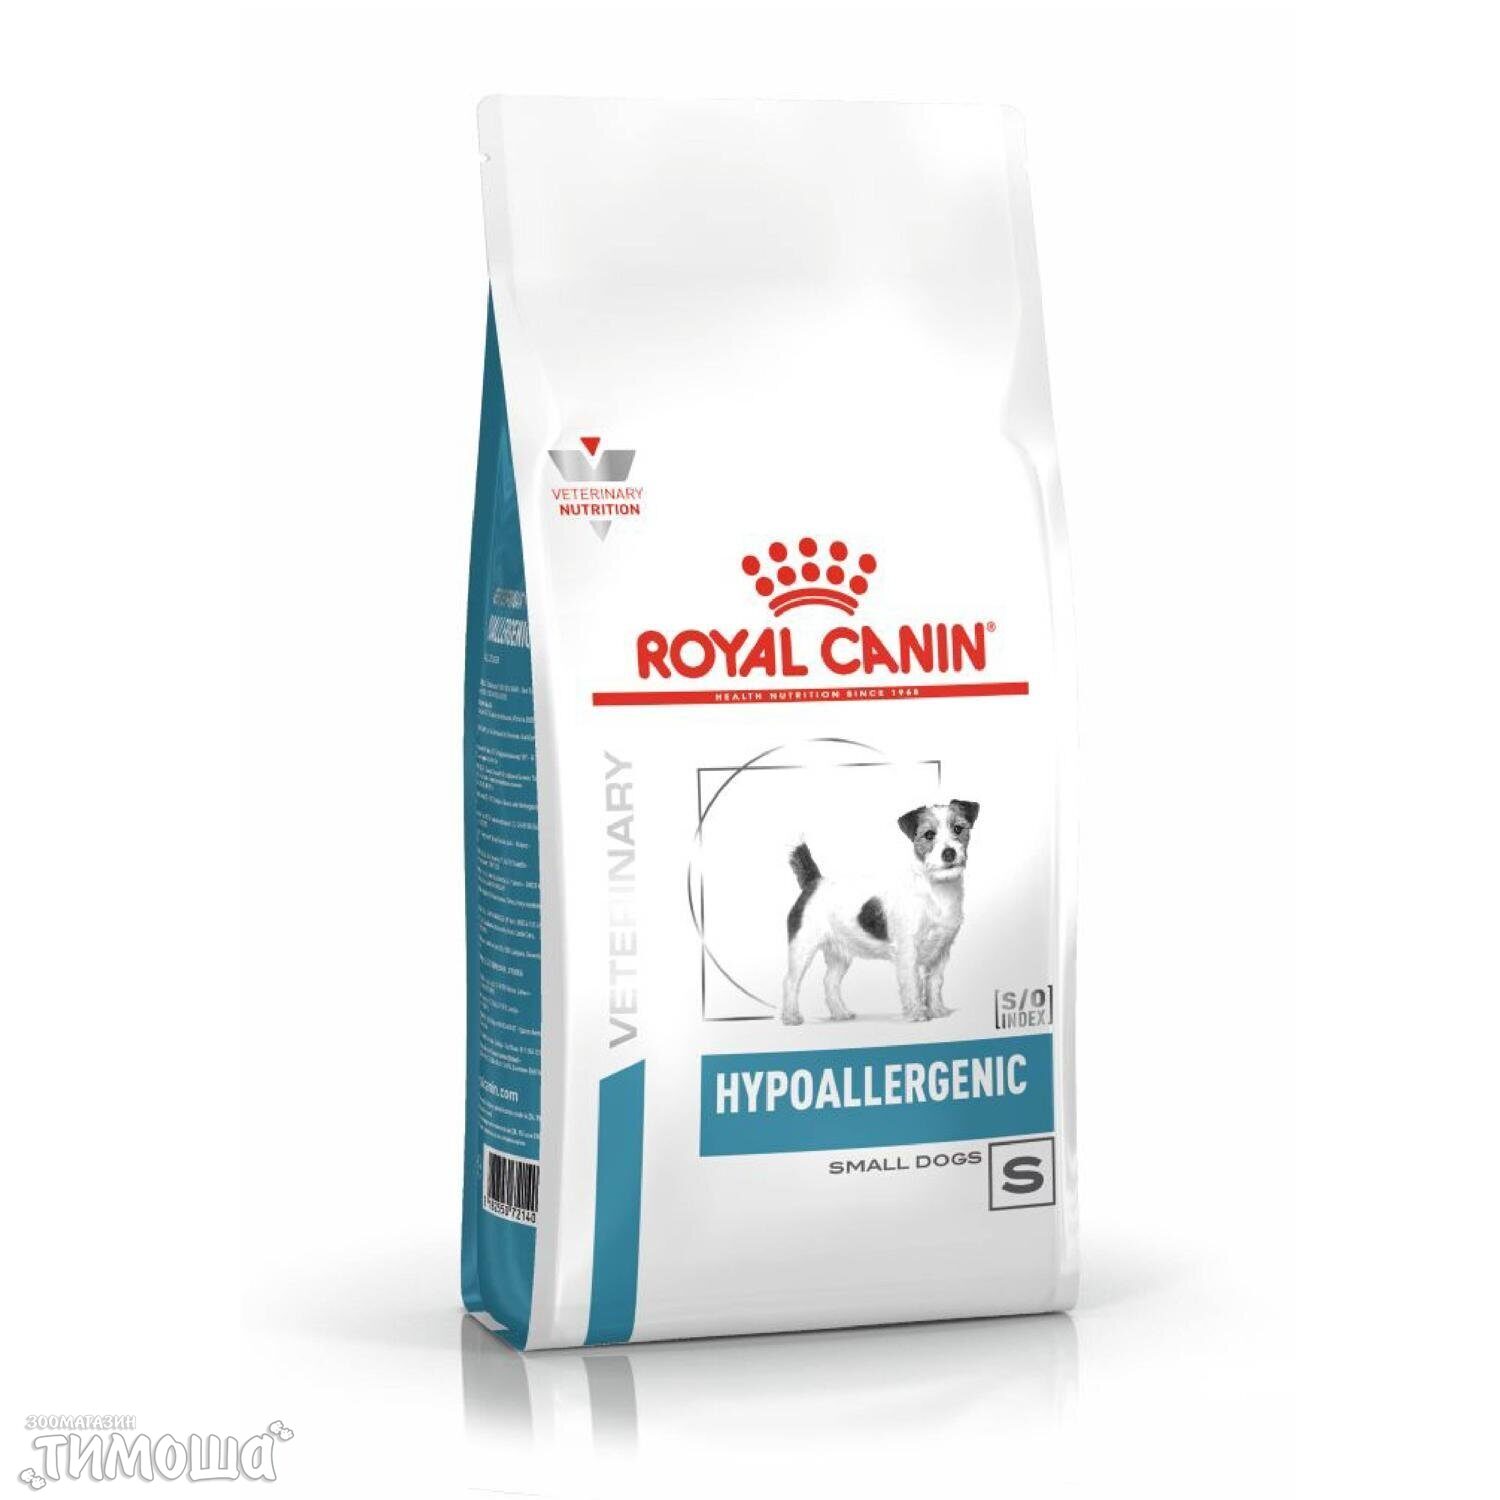 ROYAL CANIN Hypoallergenic Small Dog, 1 кг (развес)